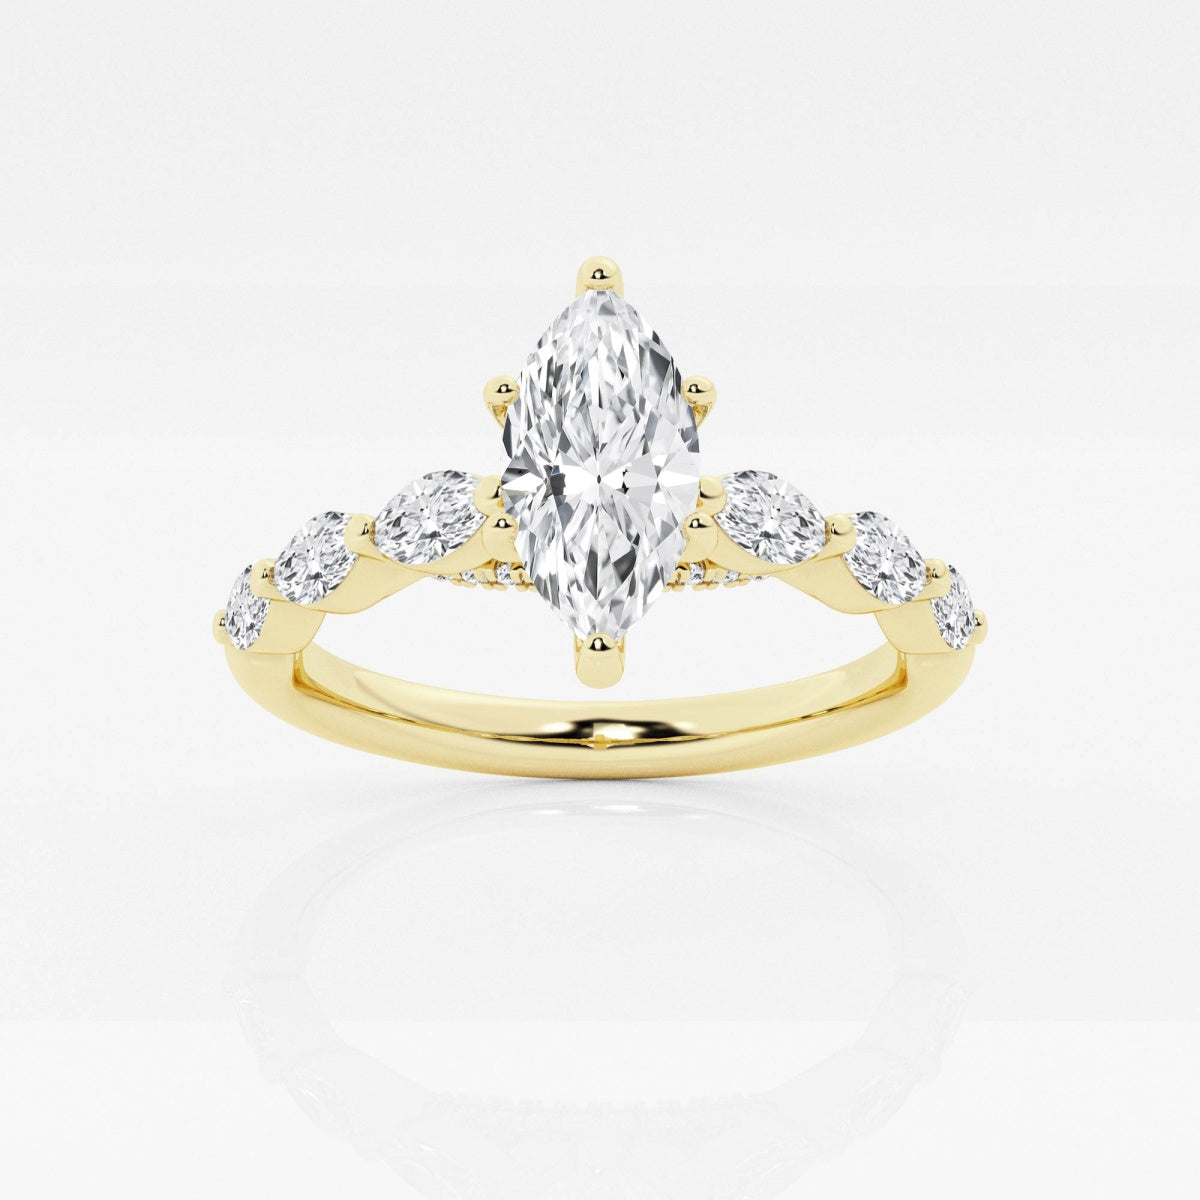 3 Carat Marquise Cut Moissanite Diamond Engagement Ring With Unique Band